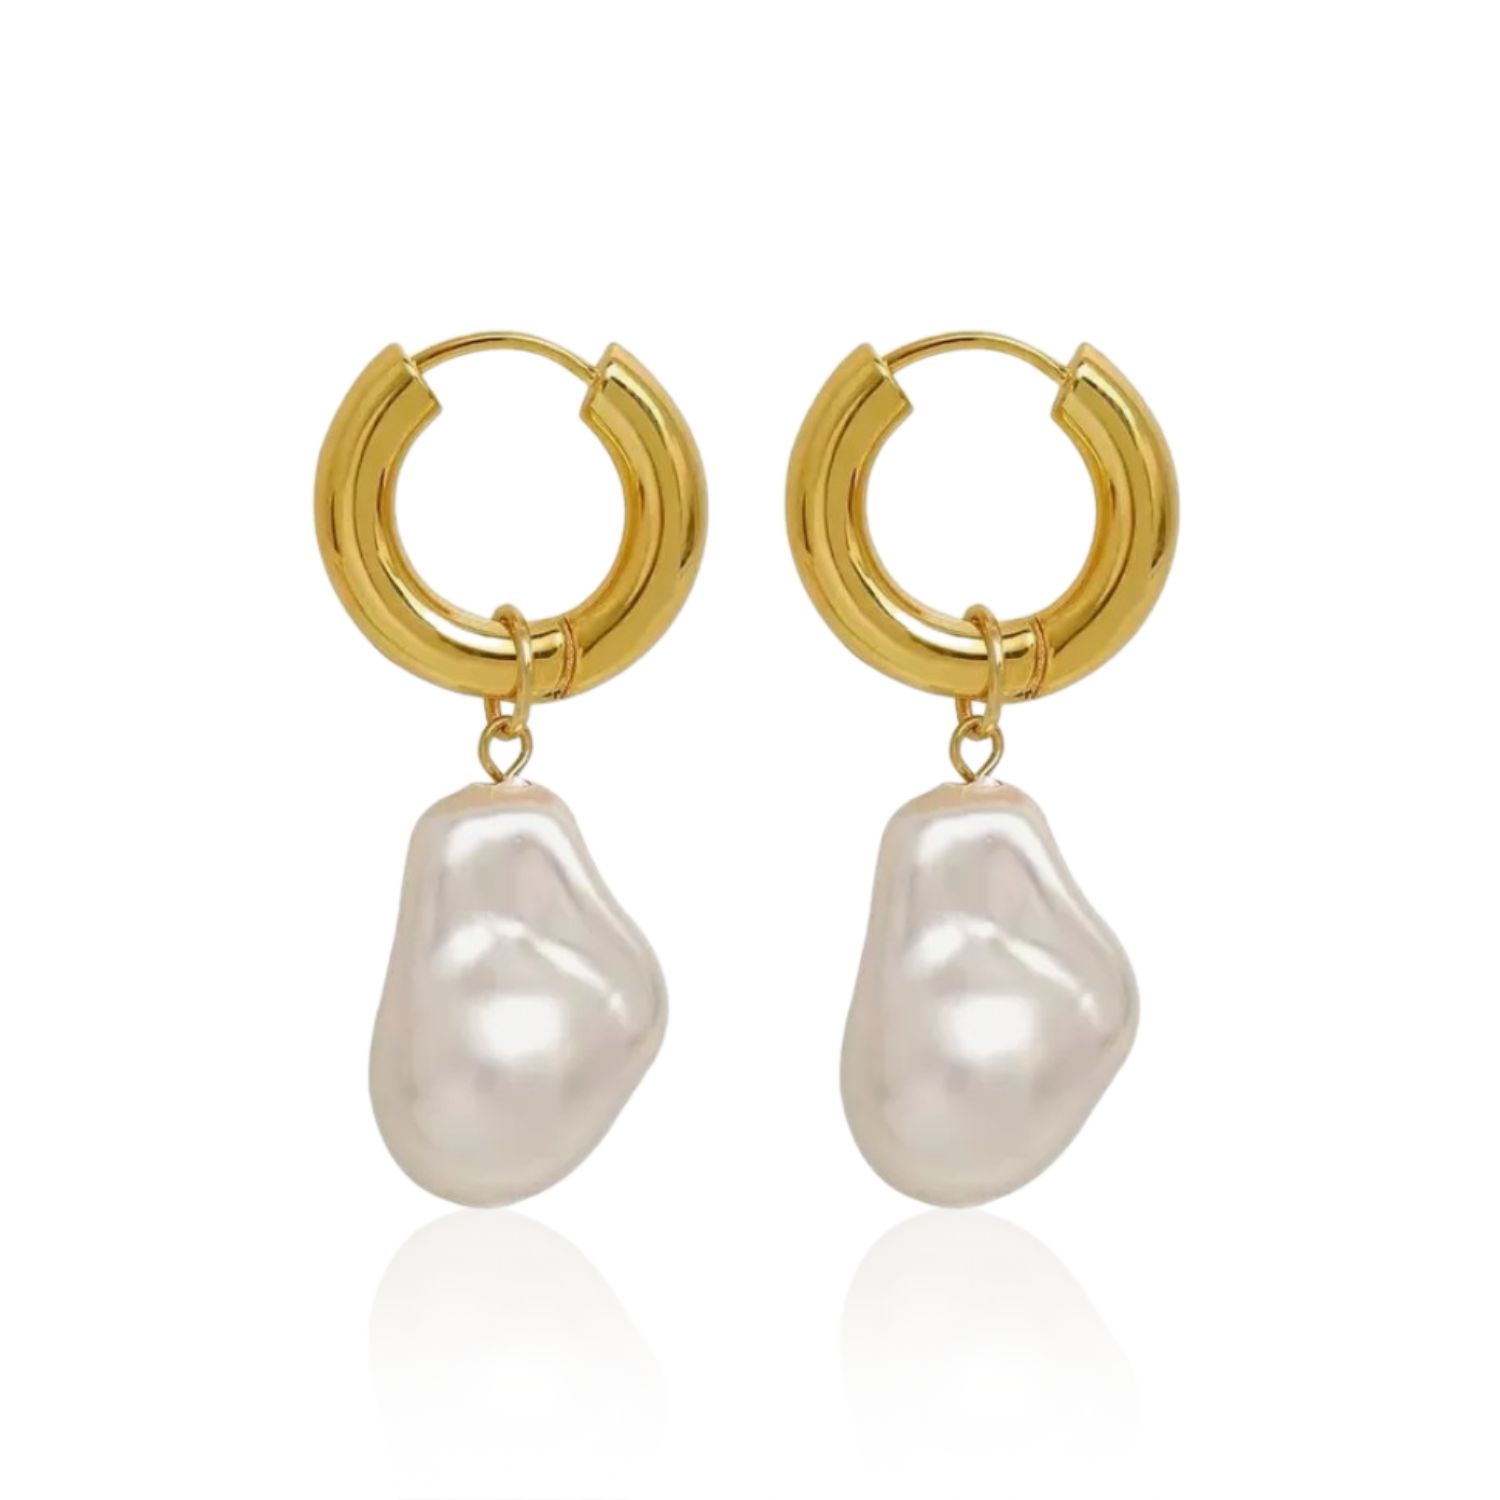 Upgrade your style with these elegant chunky hoops that feature irregular pearl drops. Crafted from gold-plated stainless steel, the hoops are designed with a secure latch closure to ensure comfort and ease of wear. These earrings offer a modern take on the classic pearl hoop design and are a must-have accessory for any fashion-forward individual.